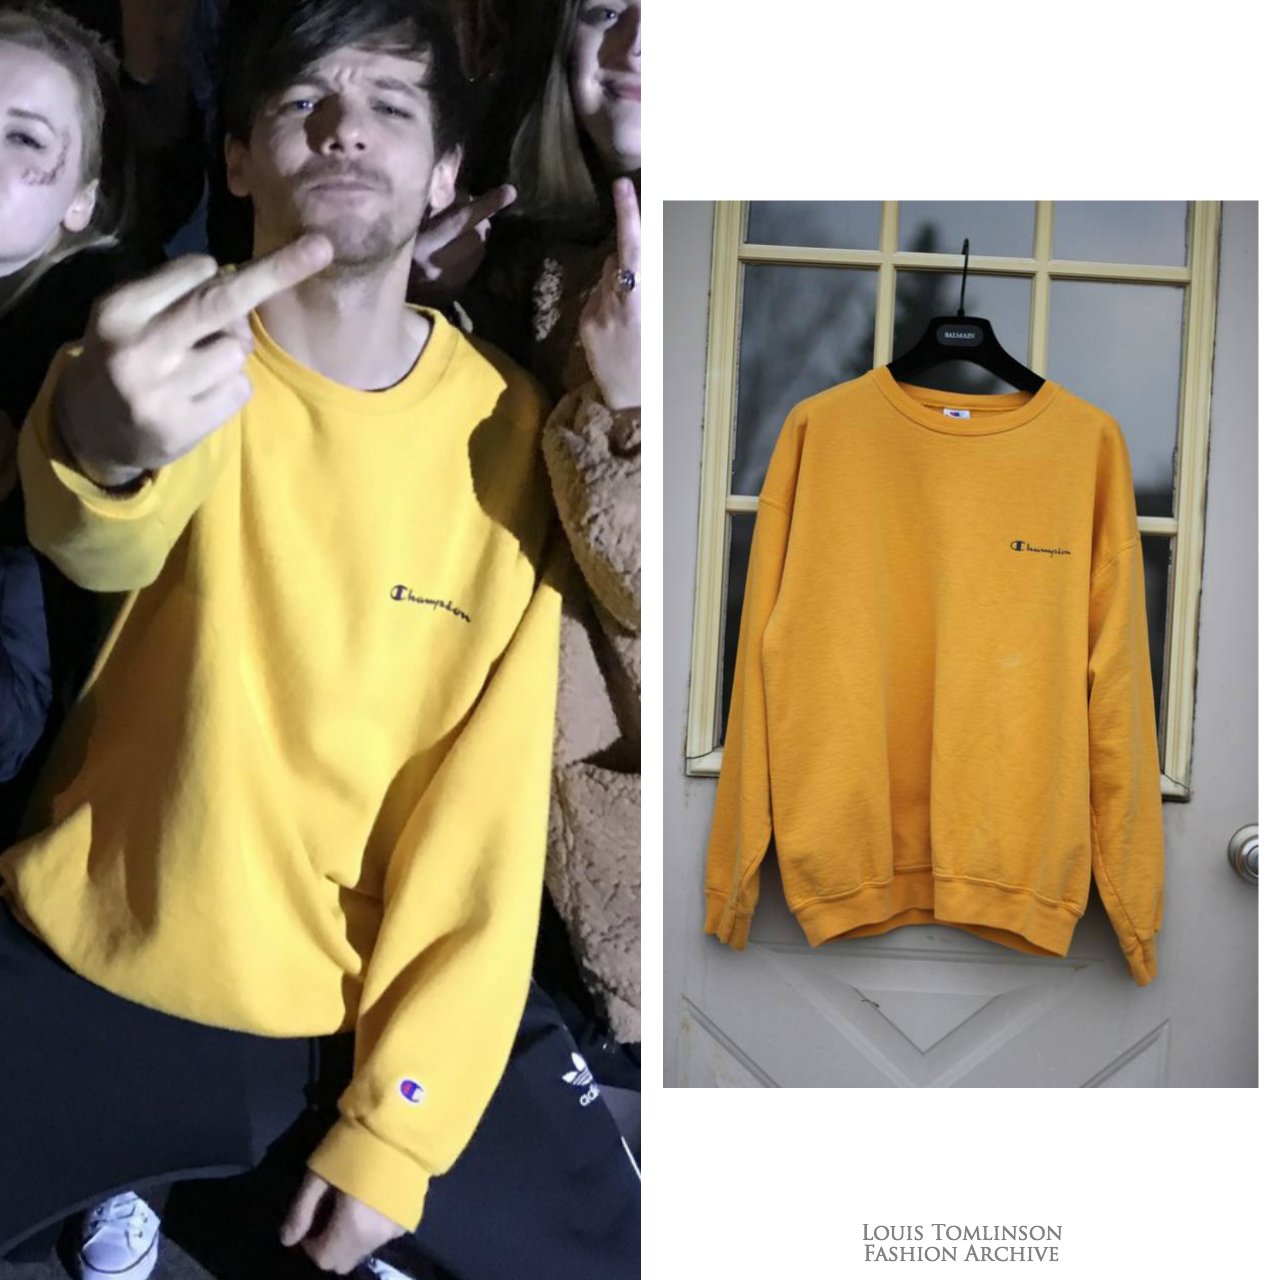 Louis Tomlinson Fashion Archive on X: Louis wore this Kappa crewneck in a  recent fan photo. He layered it with this mastermind hoodie:   / X